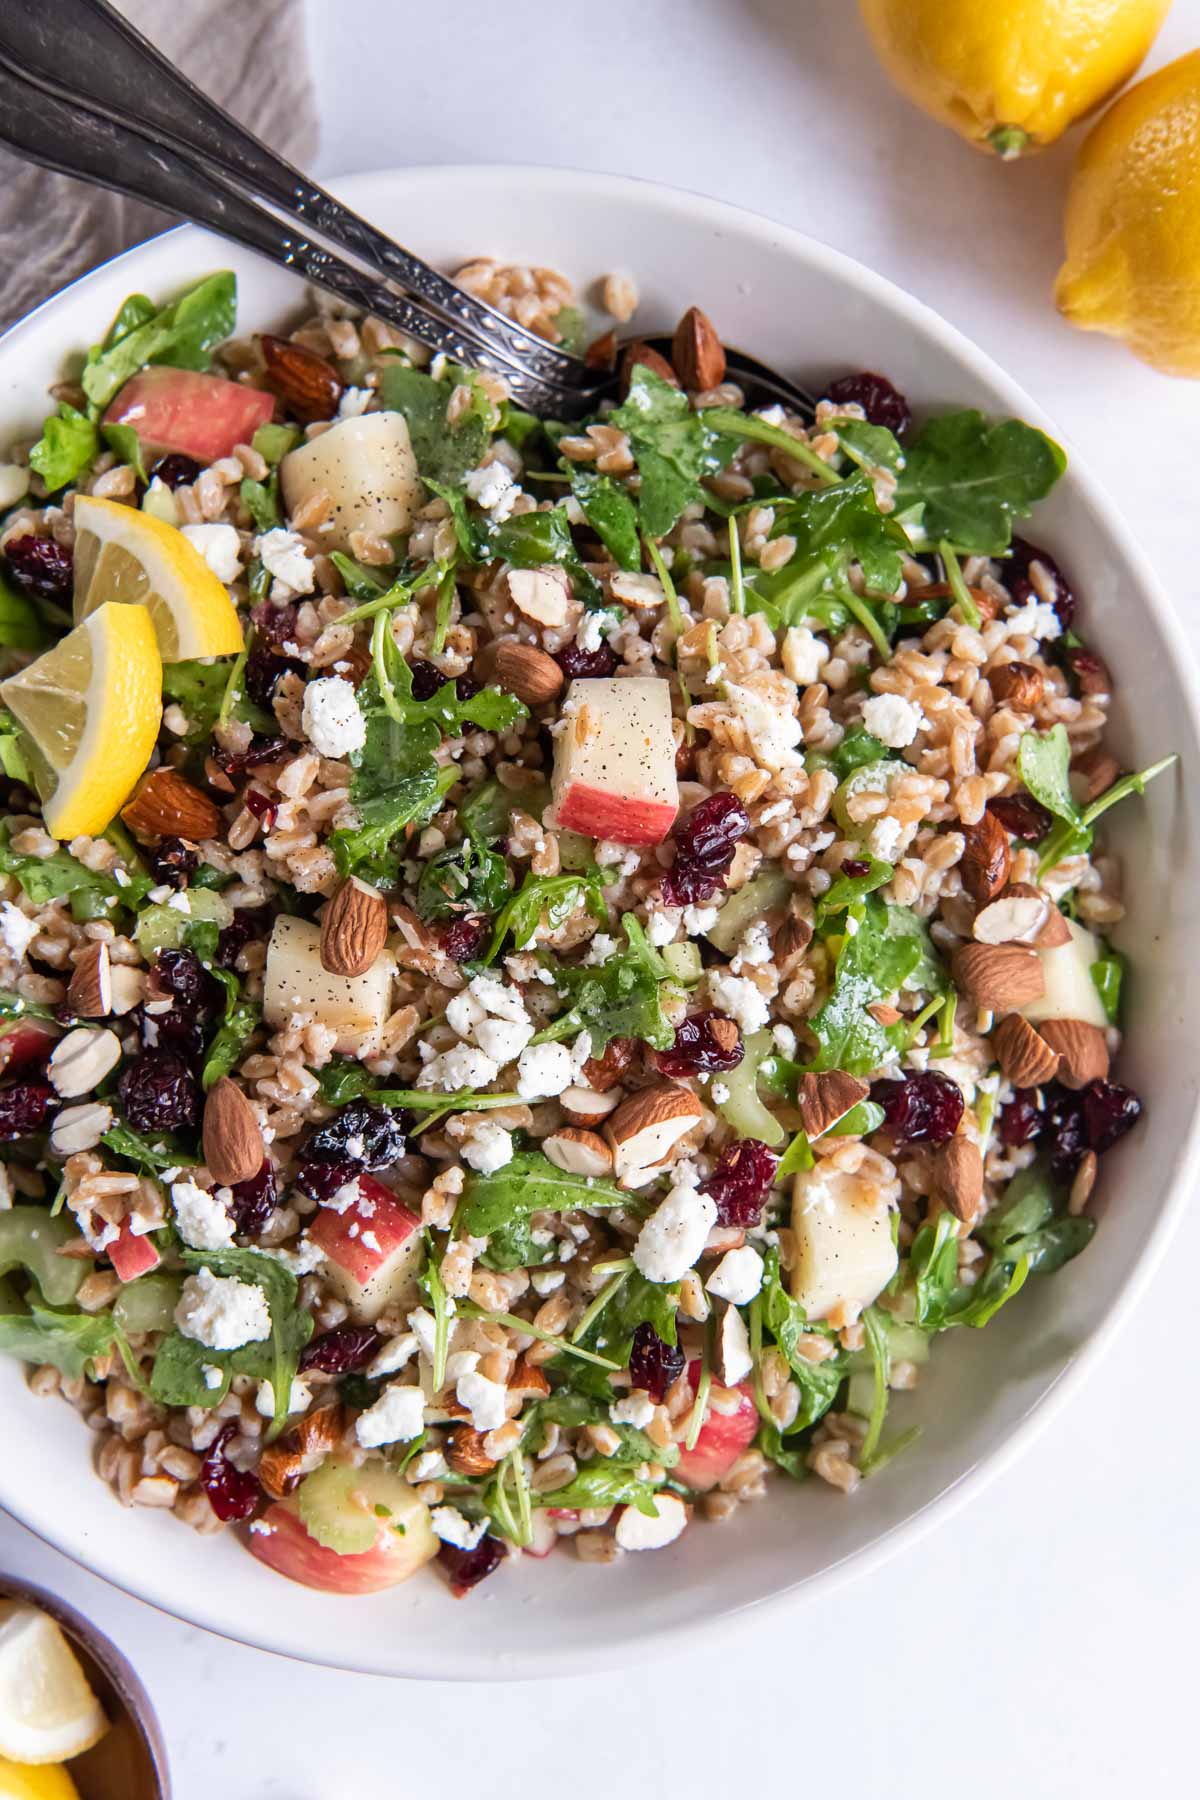 Farro salad with arugula, apple and feta in a serving bowl.